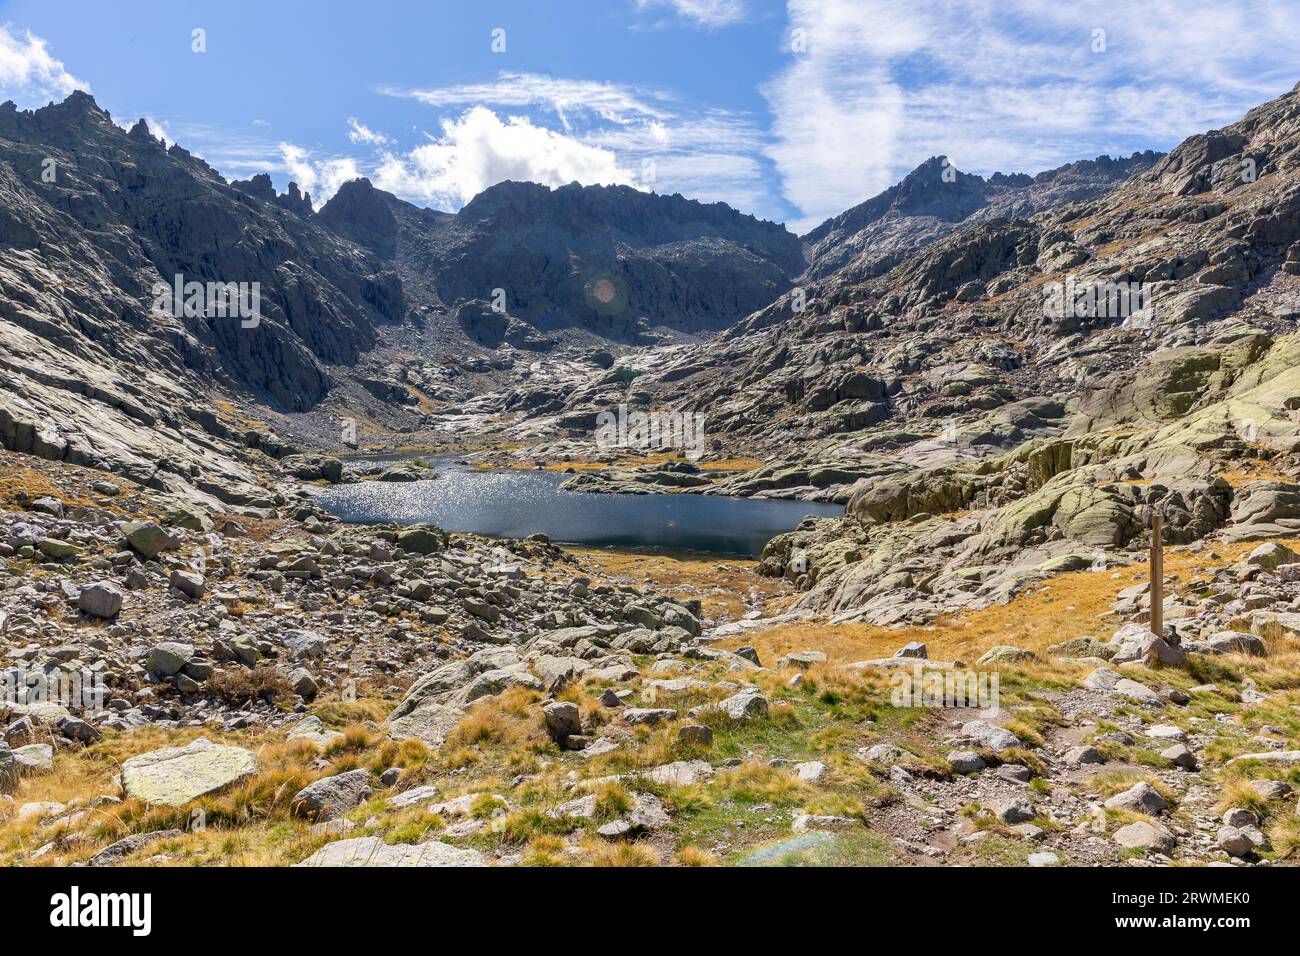 Laguna Grande de Gredos in Sierra de Gredos, landscape with high rocky mountains in the background, autumn view. Stock Photo